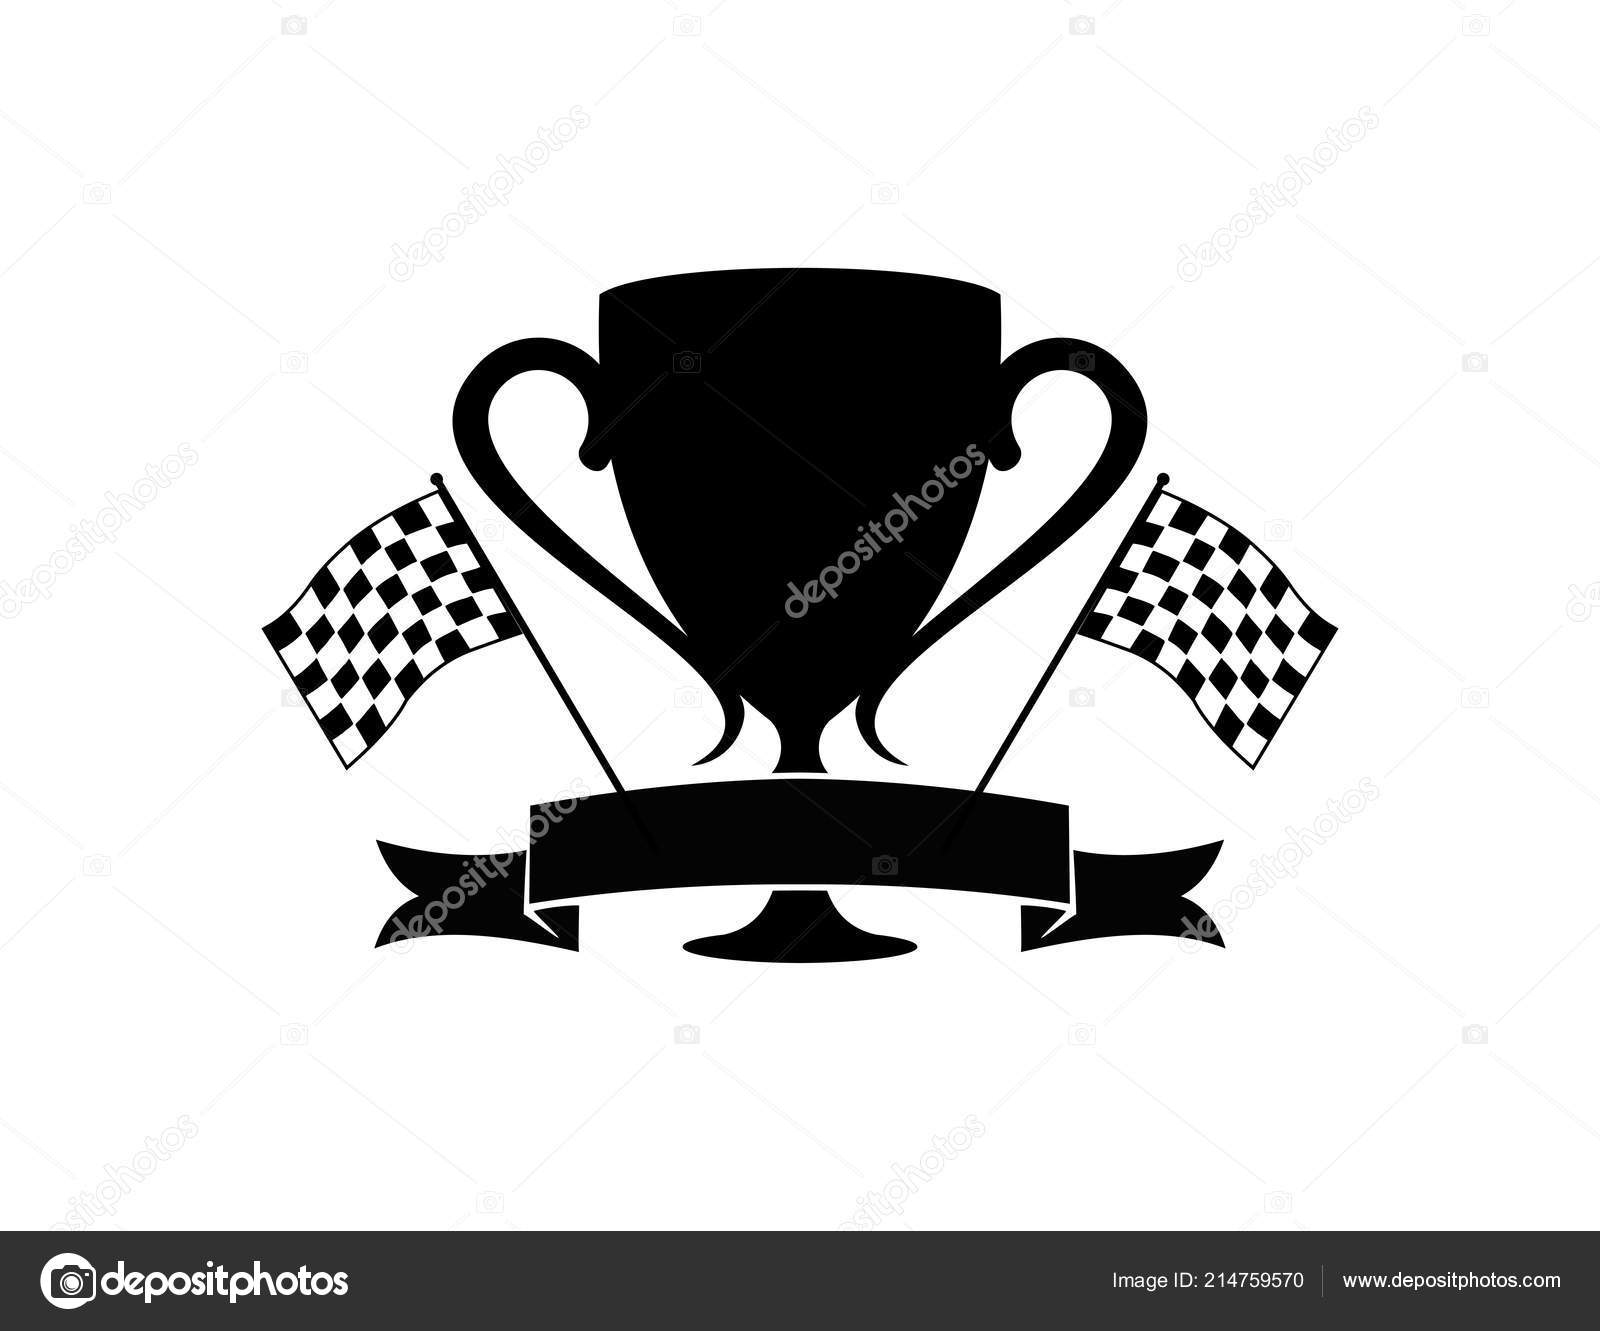 Champion Trophy Speed Racing Themed Illustration Vector Design Template Stock Vector Image by #214759570